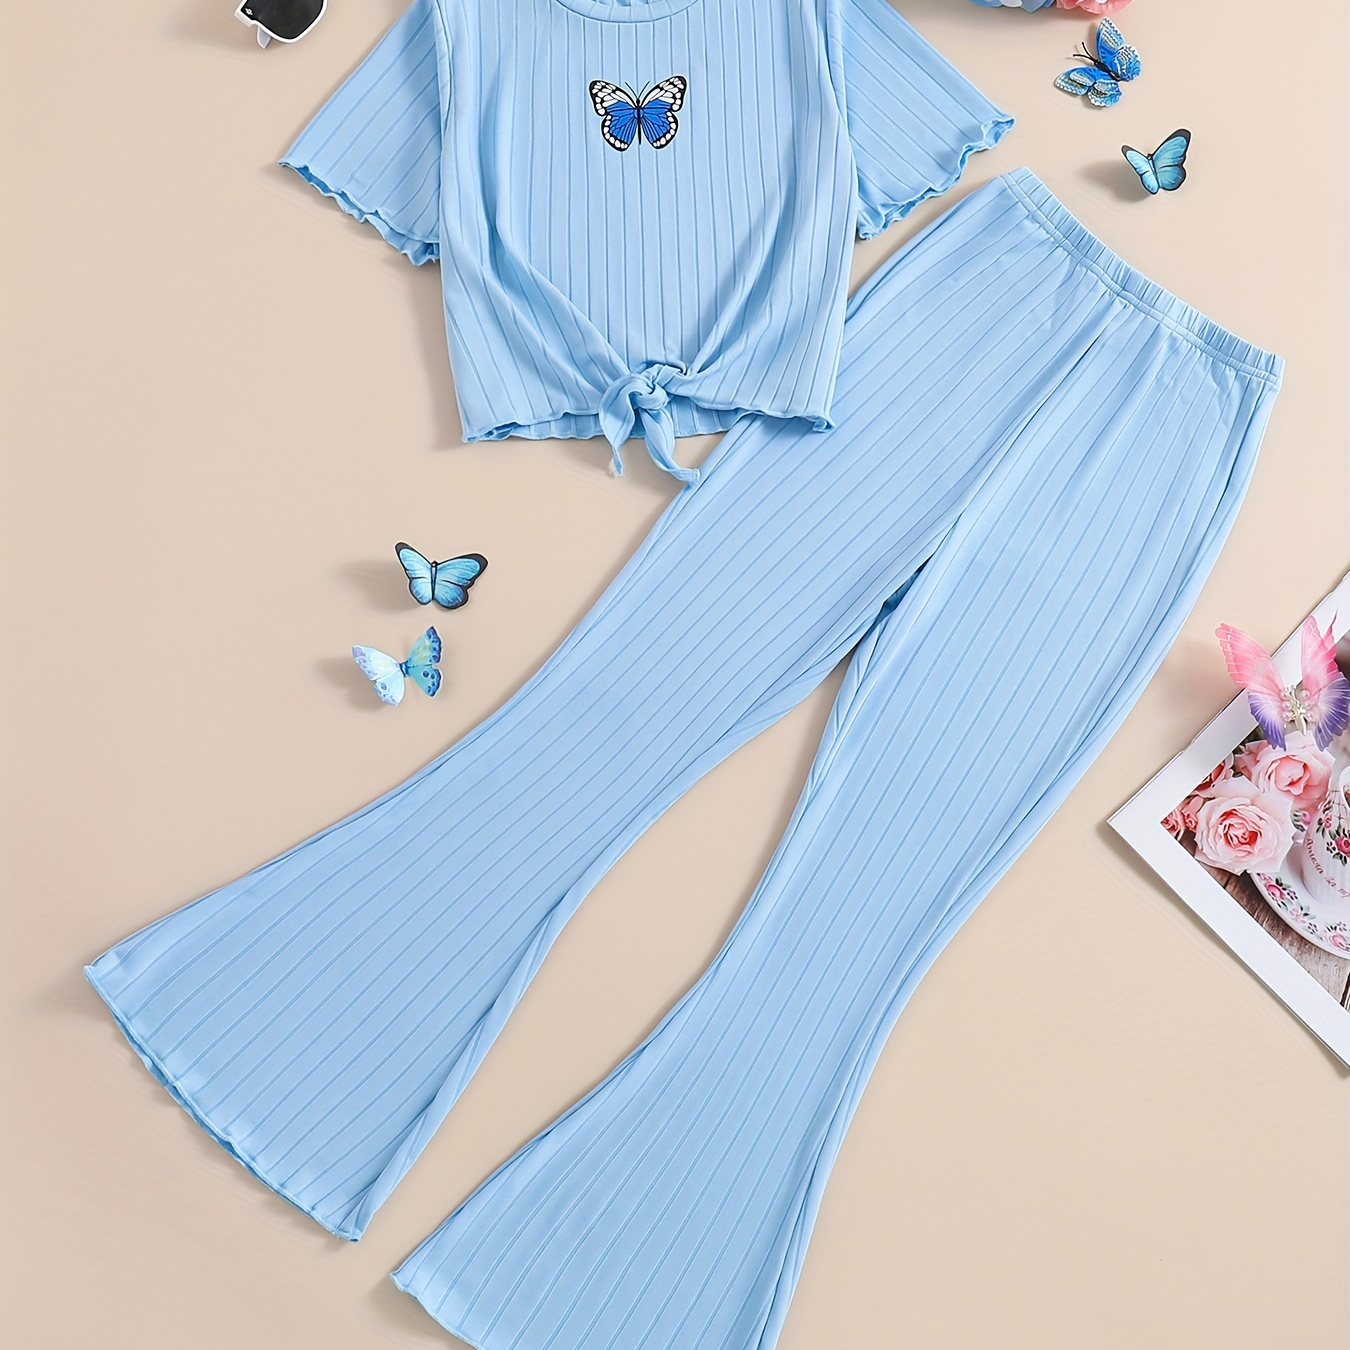 

Girl's Rib-knit 2pcs Tie Knot Butterfly Graphic T-shirt Top & Flared Pants Set, Casual Outfit Summer Clothes